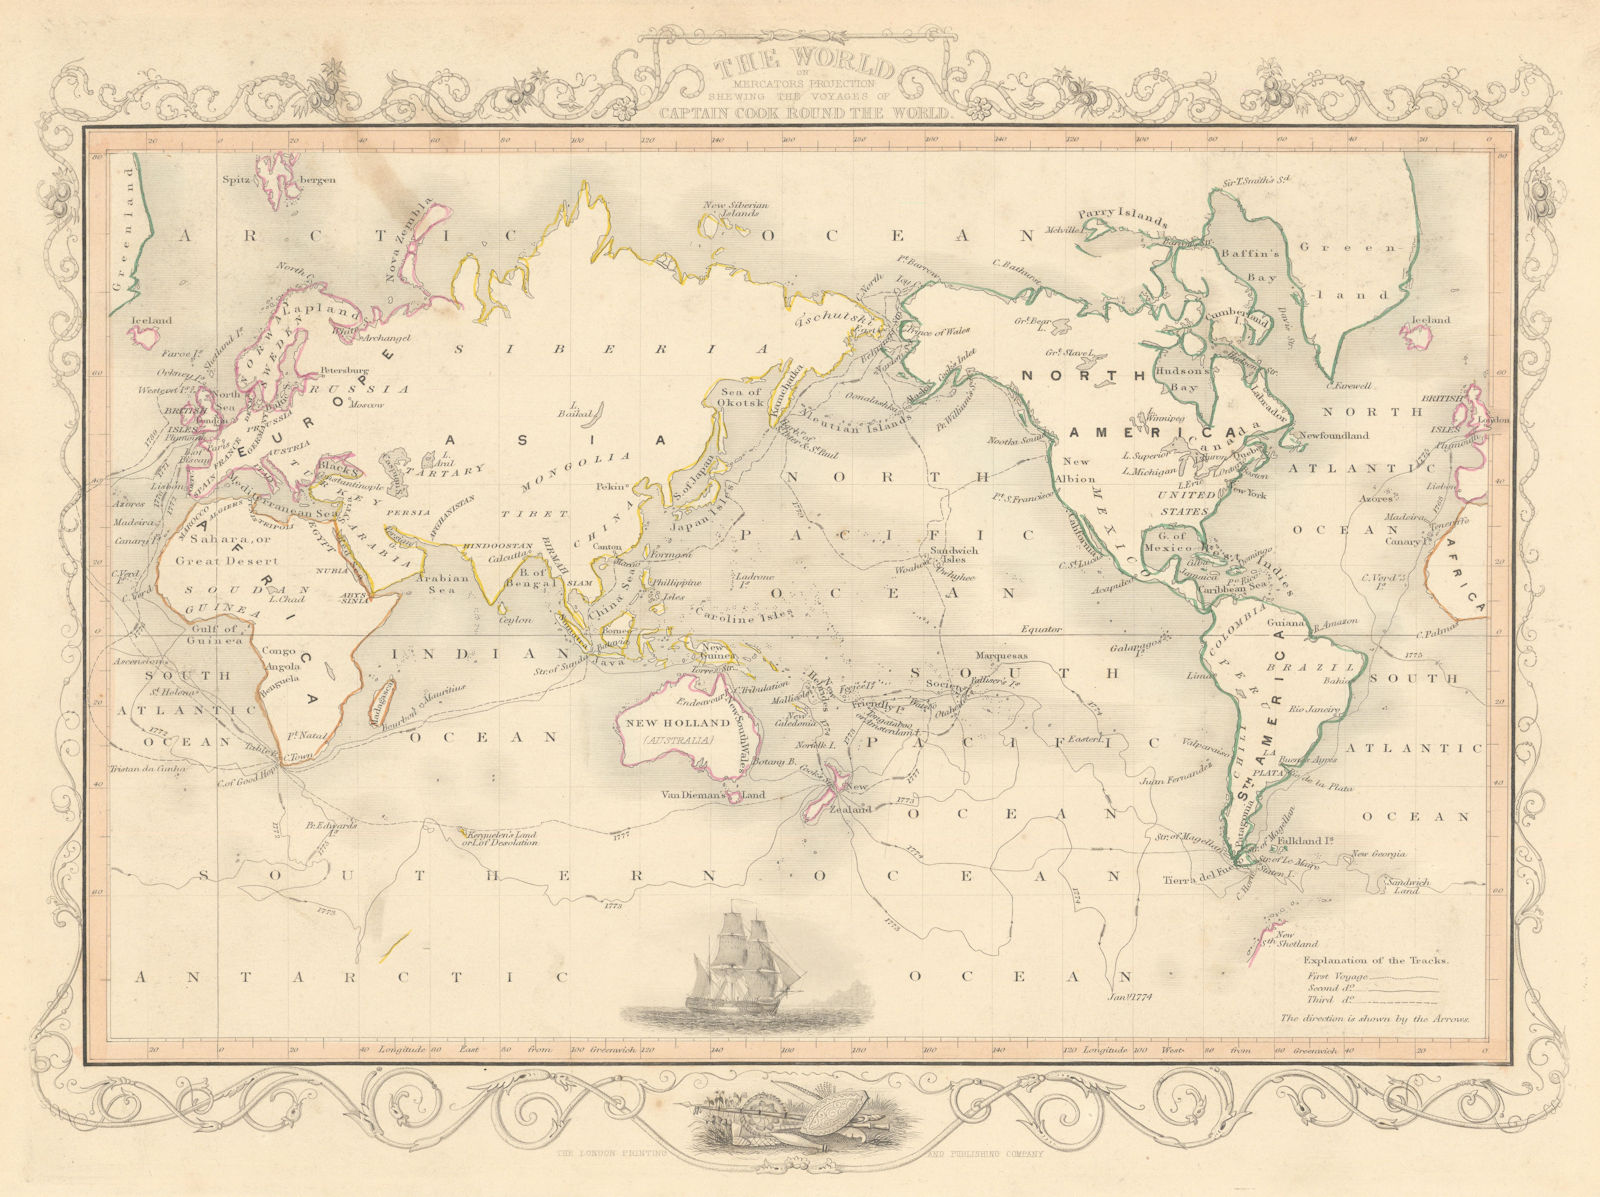 THE WORLD. 'Shewing the voyages of Captain Cook'. TALLIS/RAPKIN 1851 old map